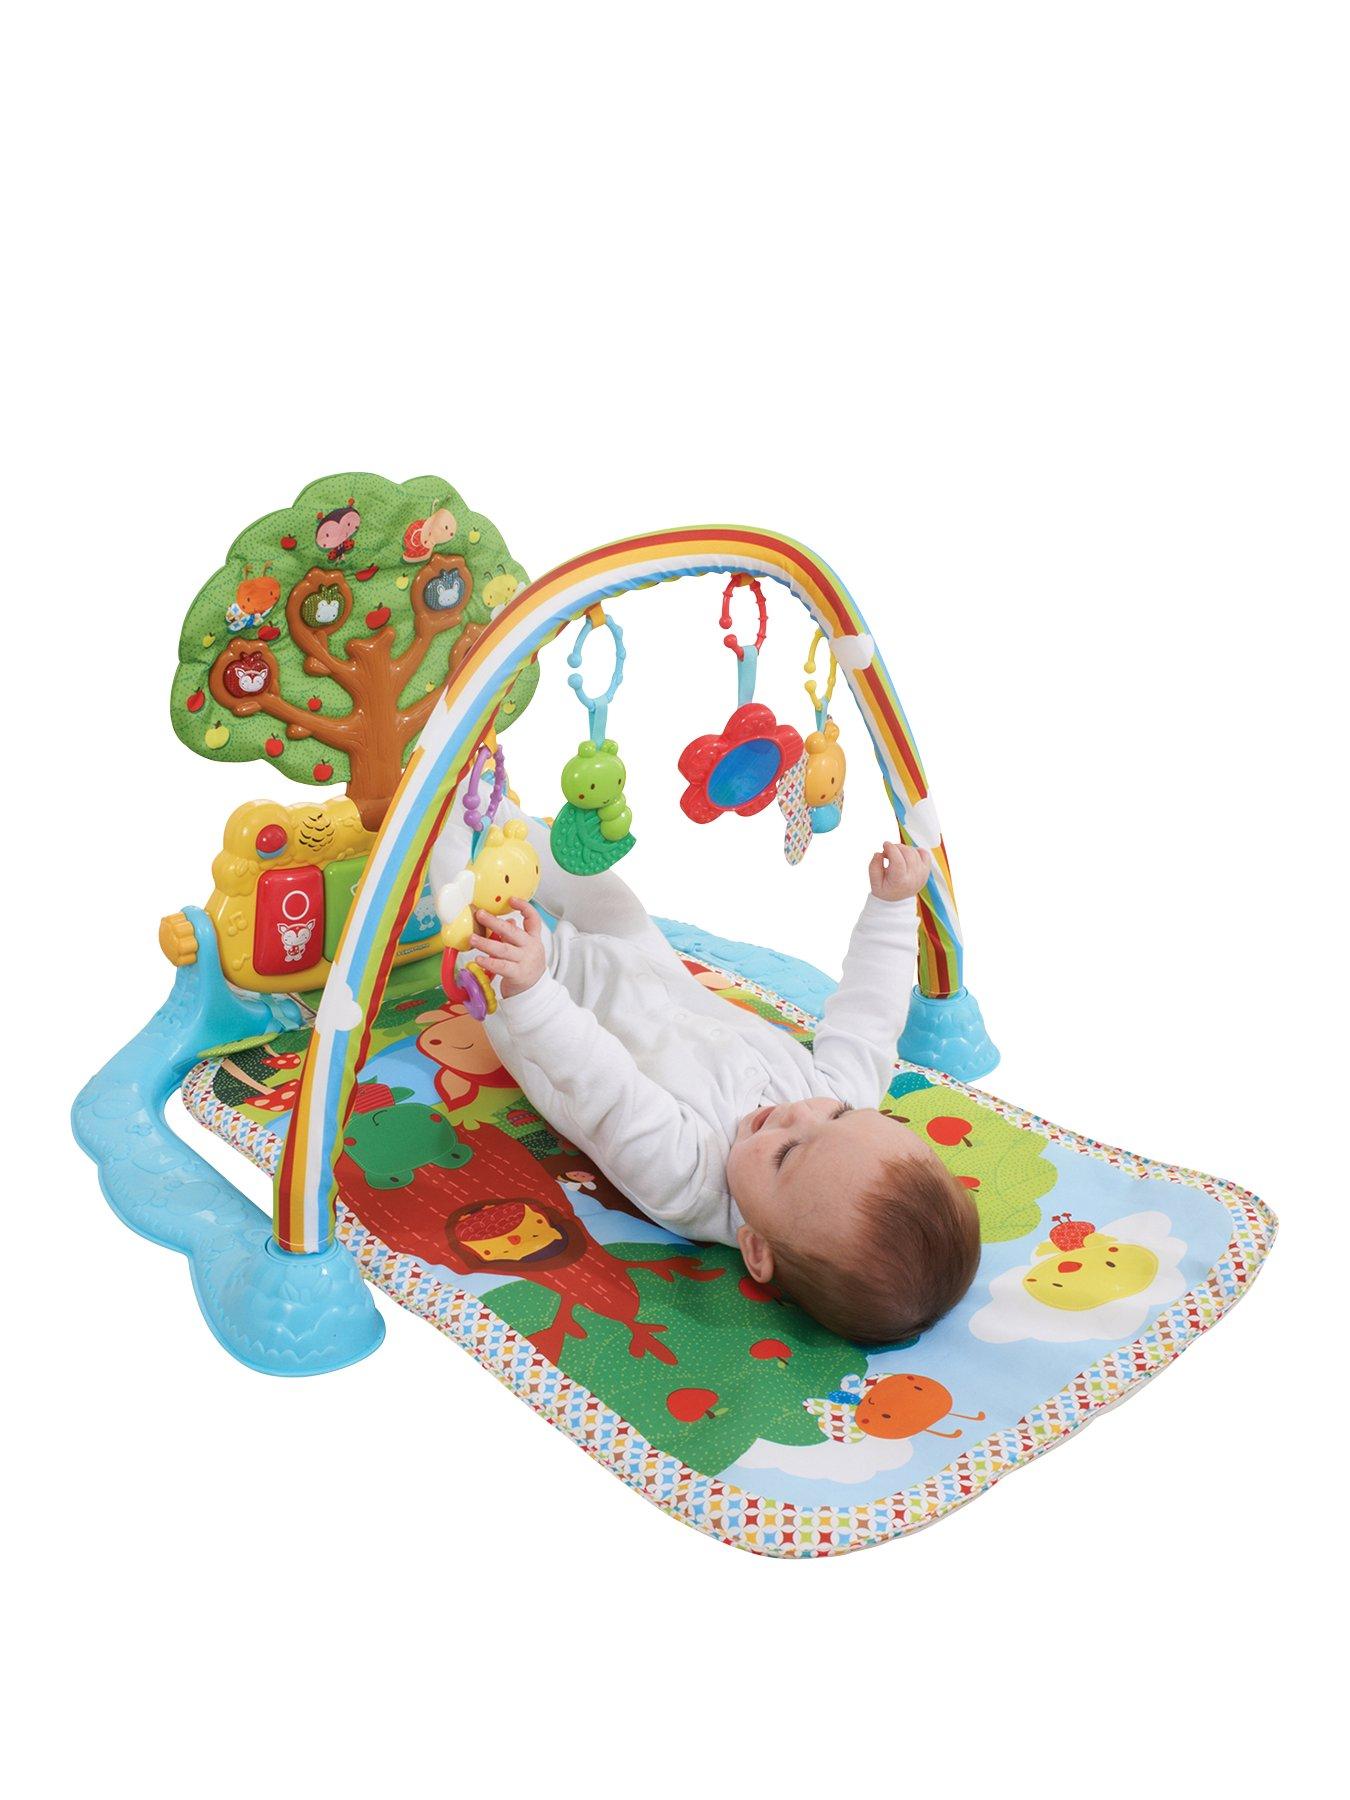 glow and giggle playmat